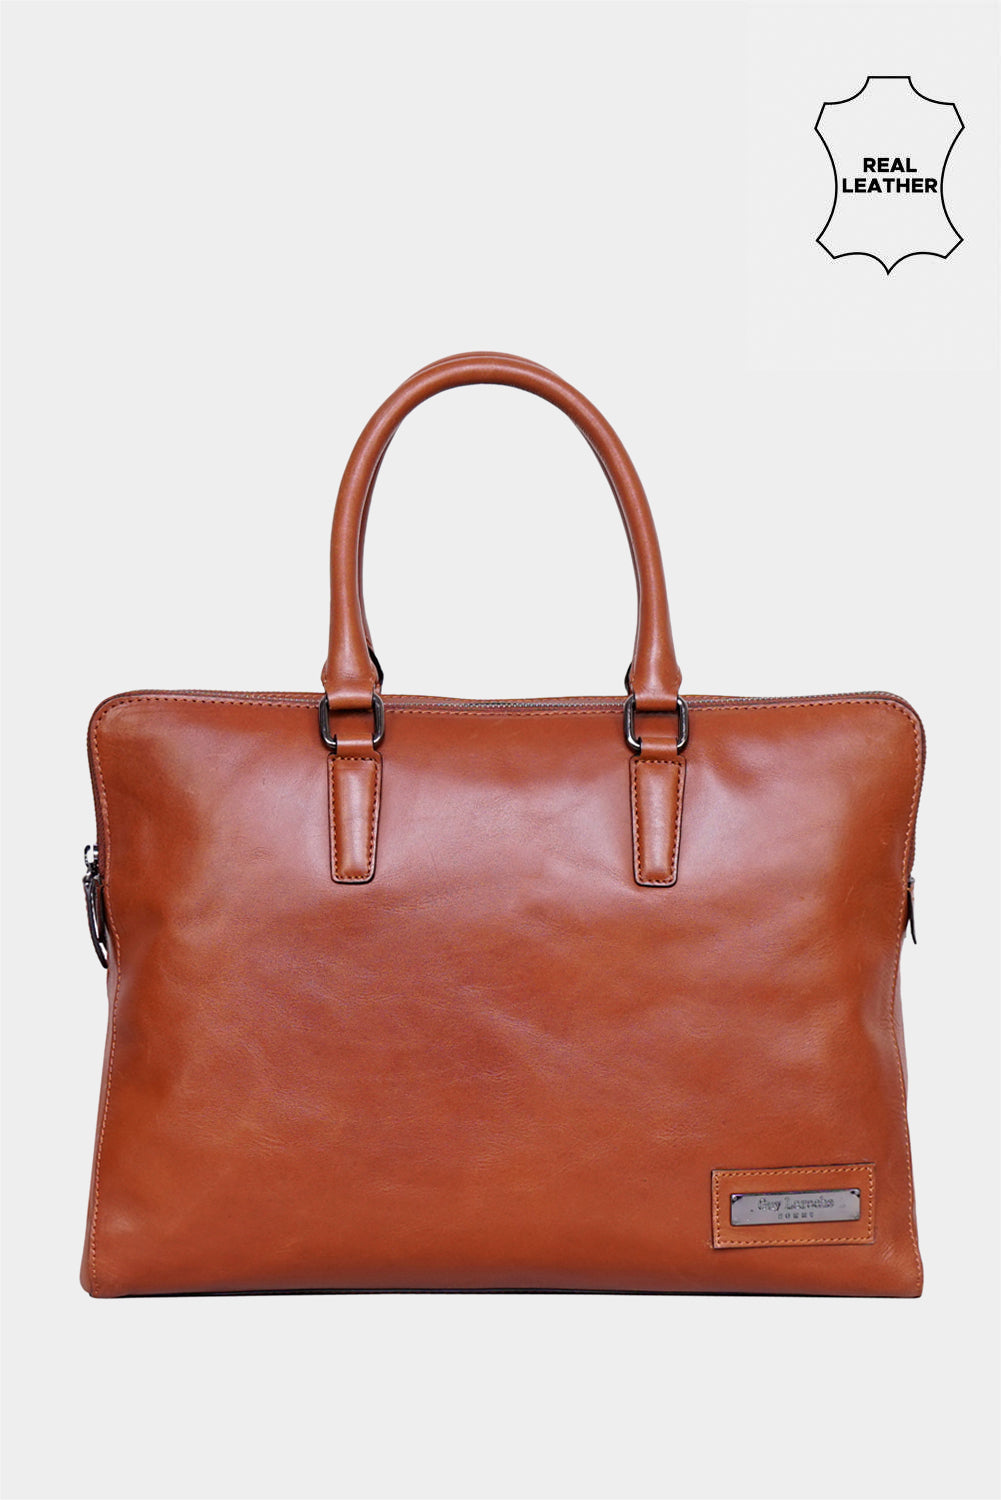 HELP! I'm looking for a good leather bag that resembles a Japanese high  school tote bag. Any one have any suggestions? : r/ManyBaggers